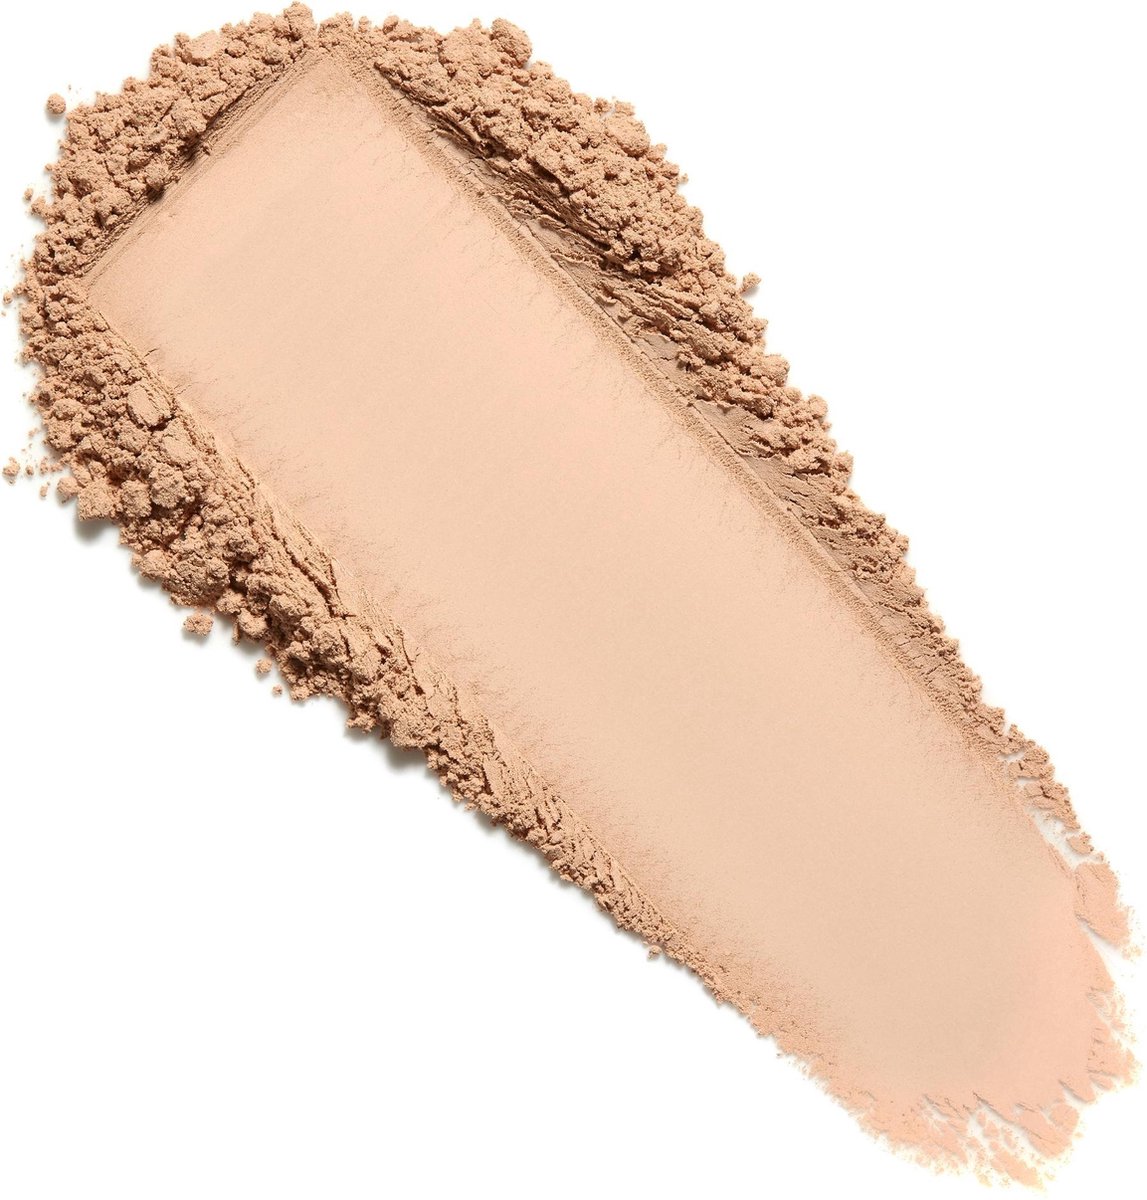 Lily Lolo Mineral Foundation SPF 15 In the Buff